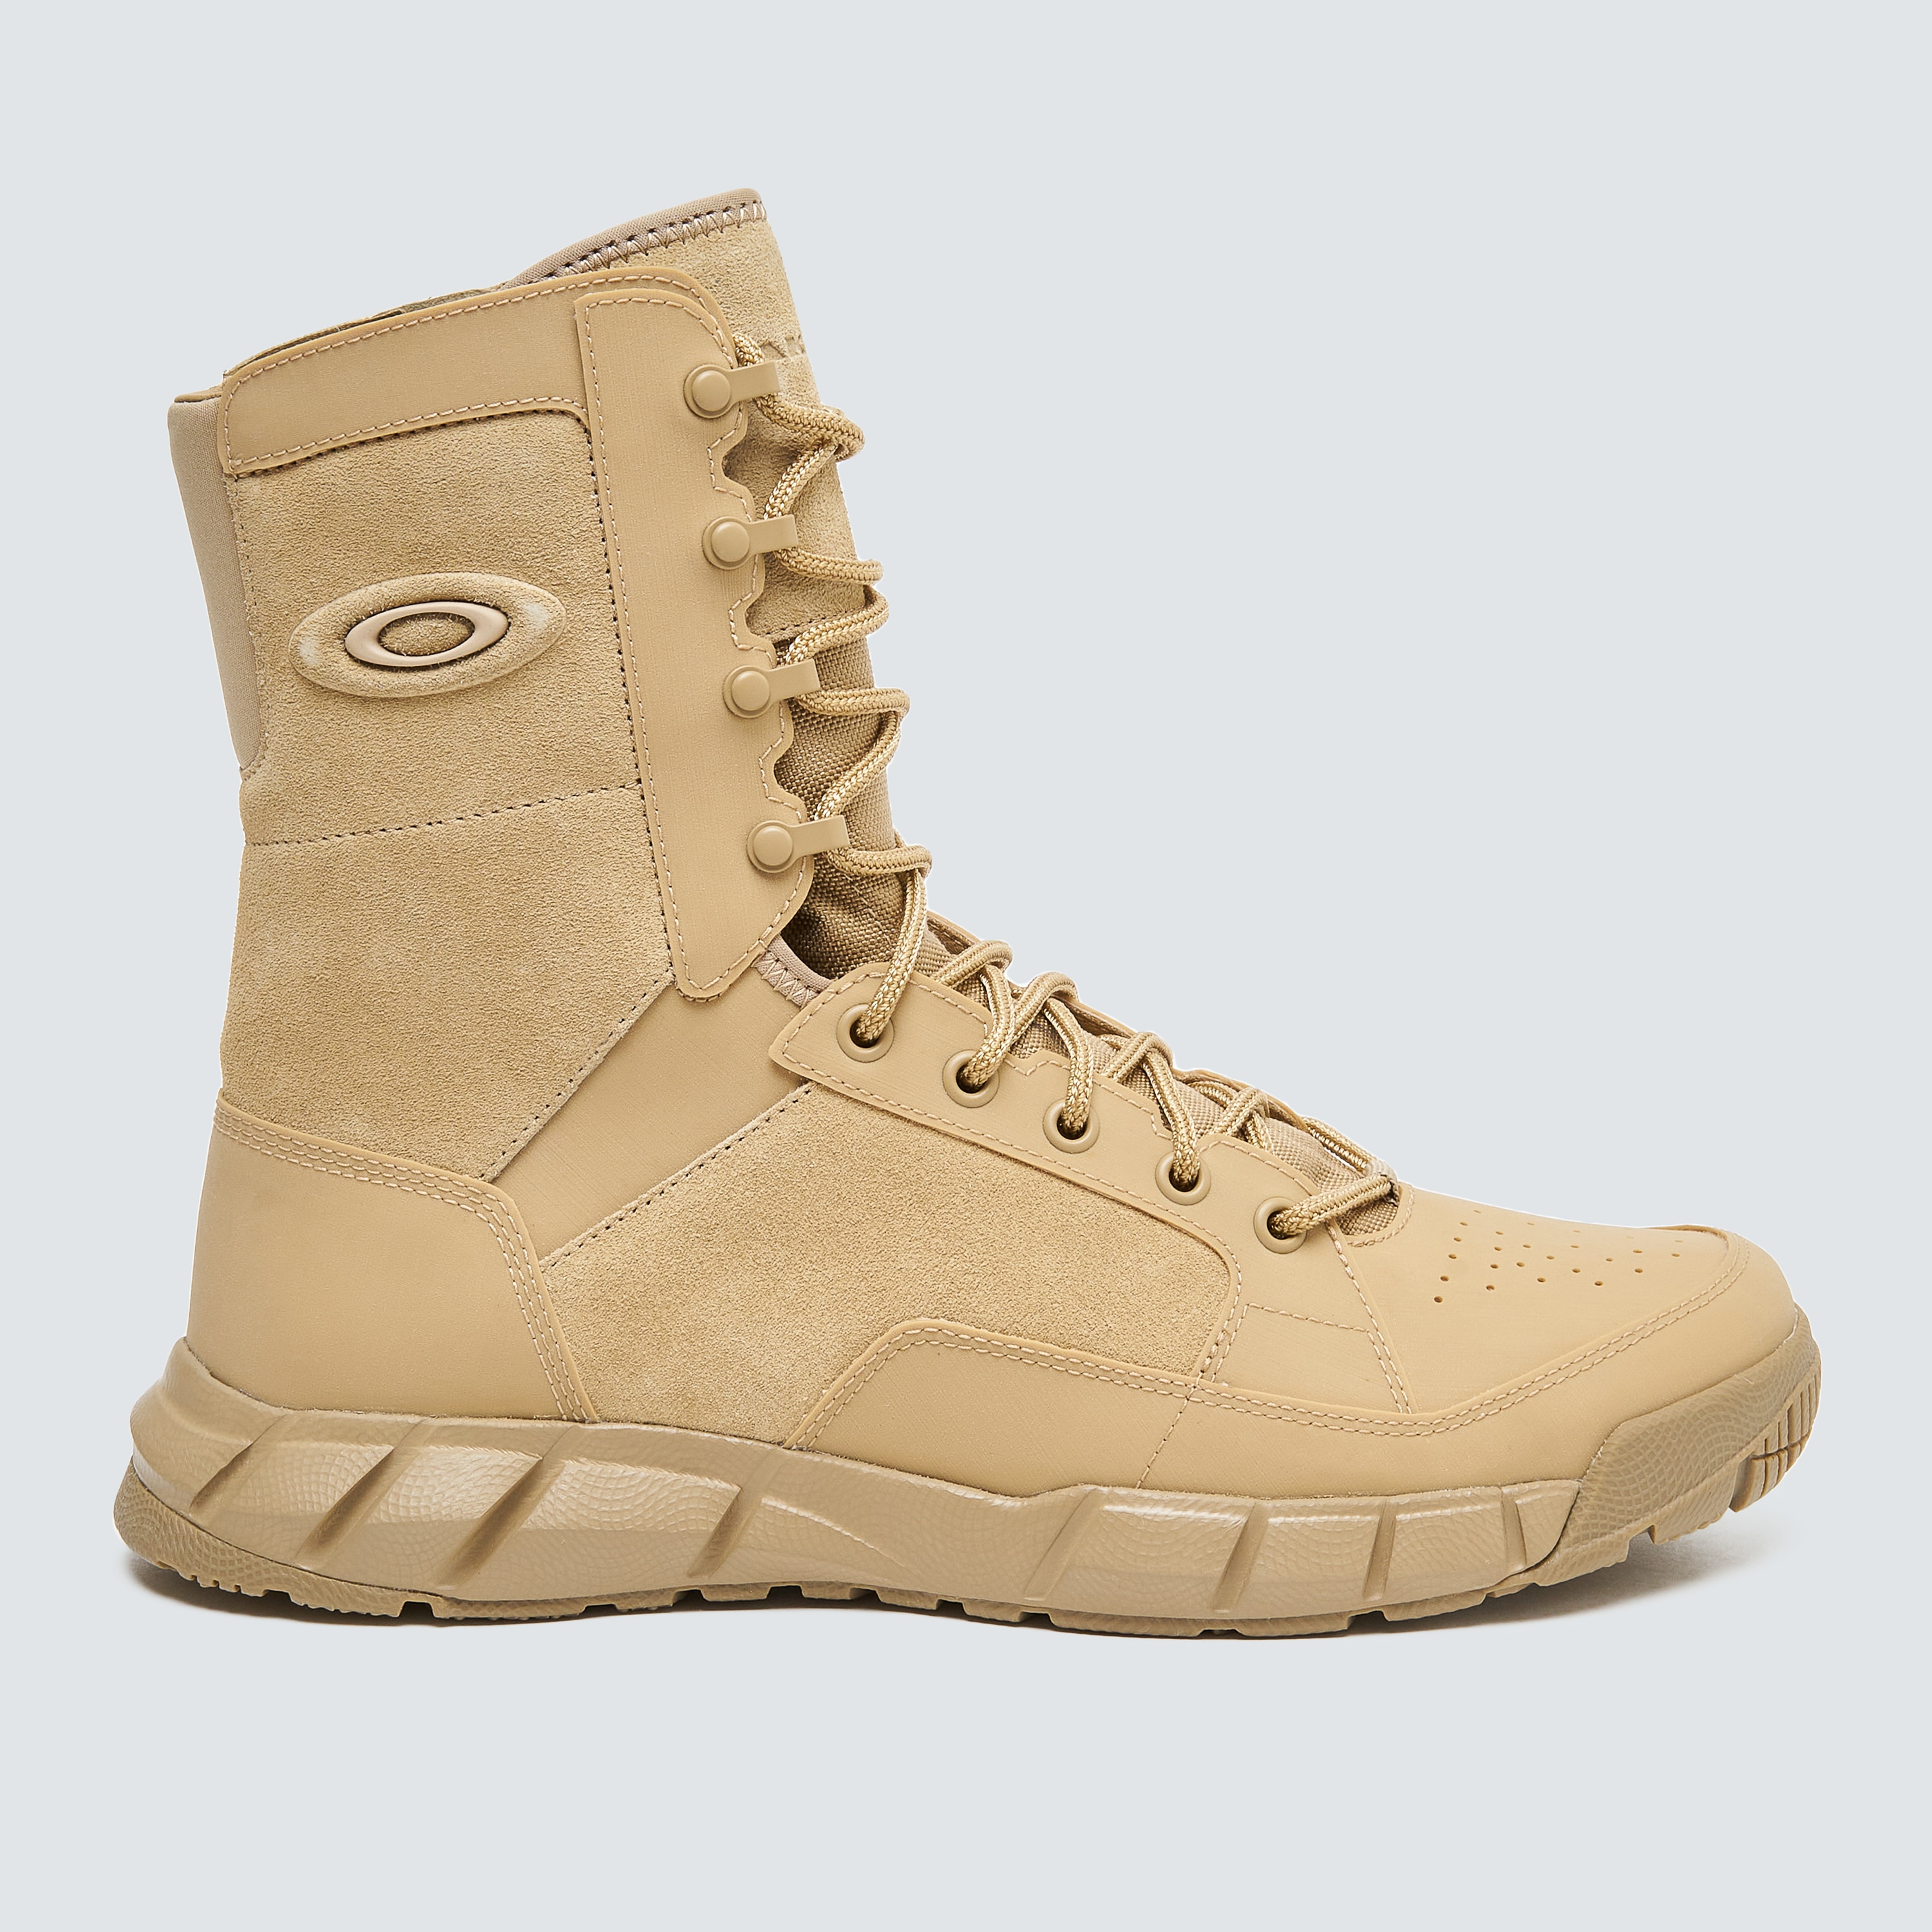 Men's OAKLEY Boots Sale, Up To 70% Off | ModeSens